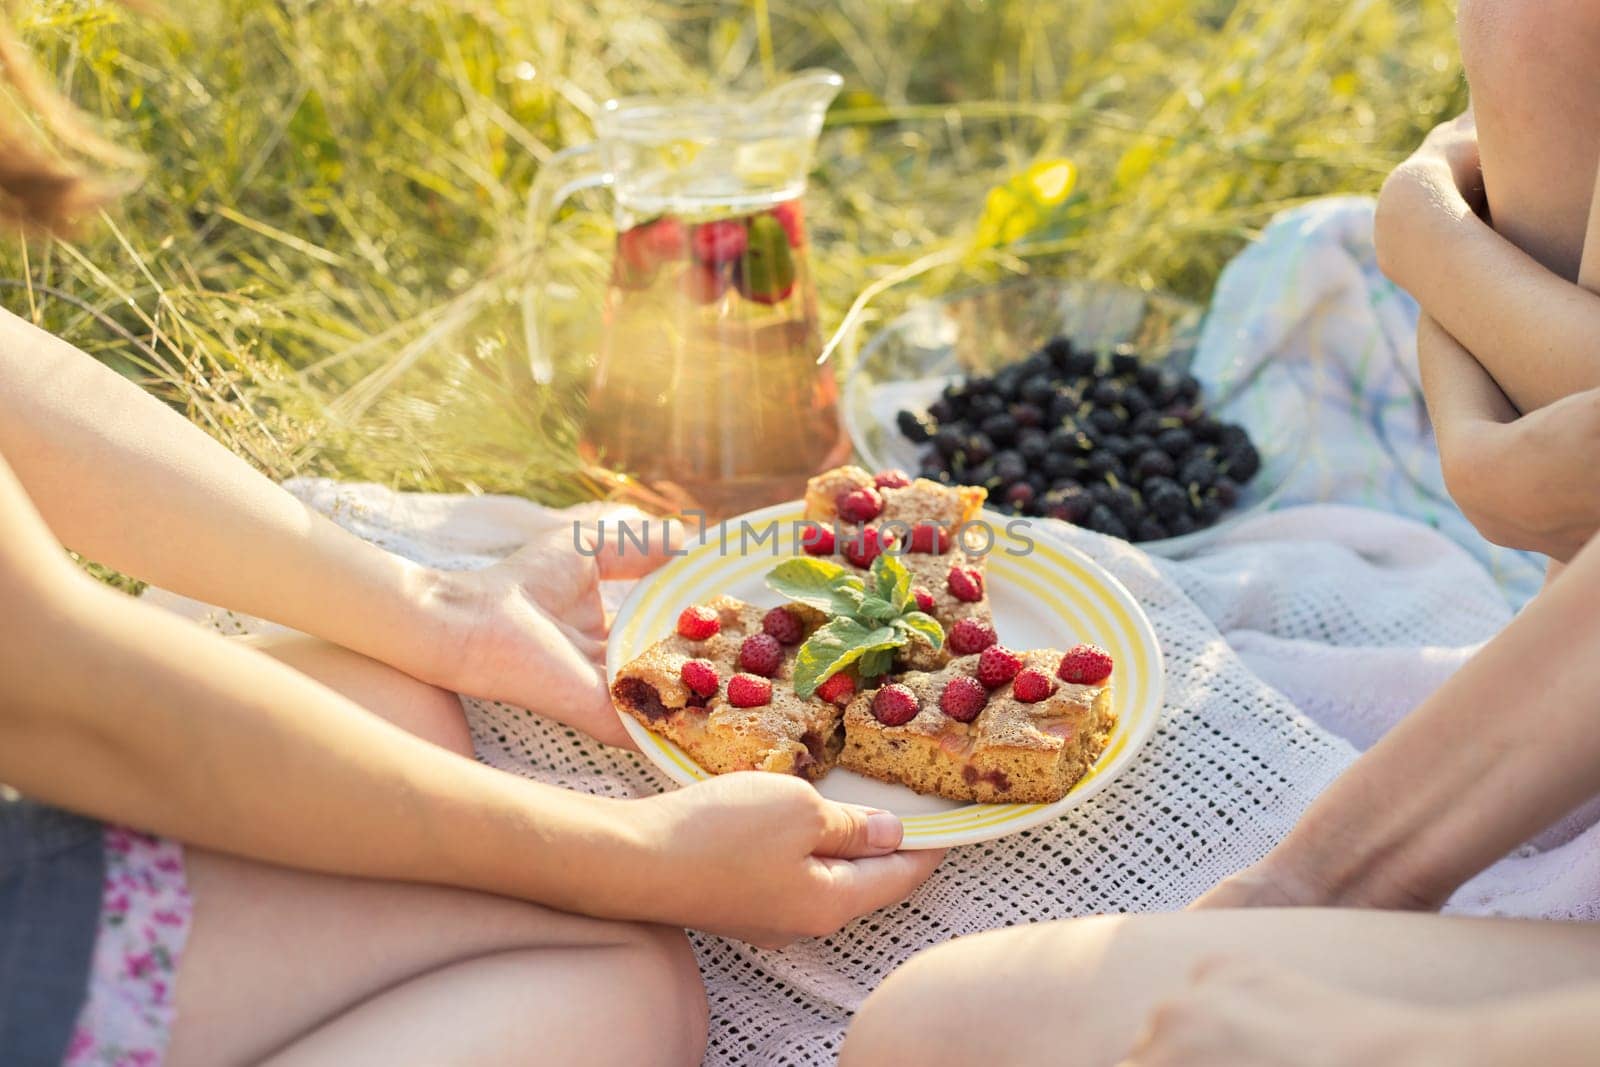 Children sitting on grass eating homemade cake with berries, drinking mint strawberry drink by VH-studio